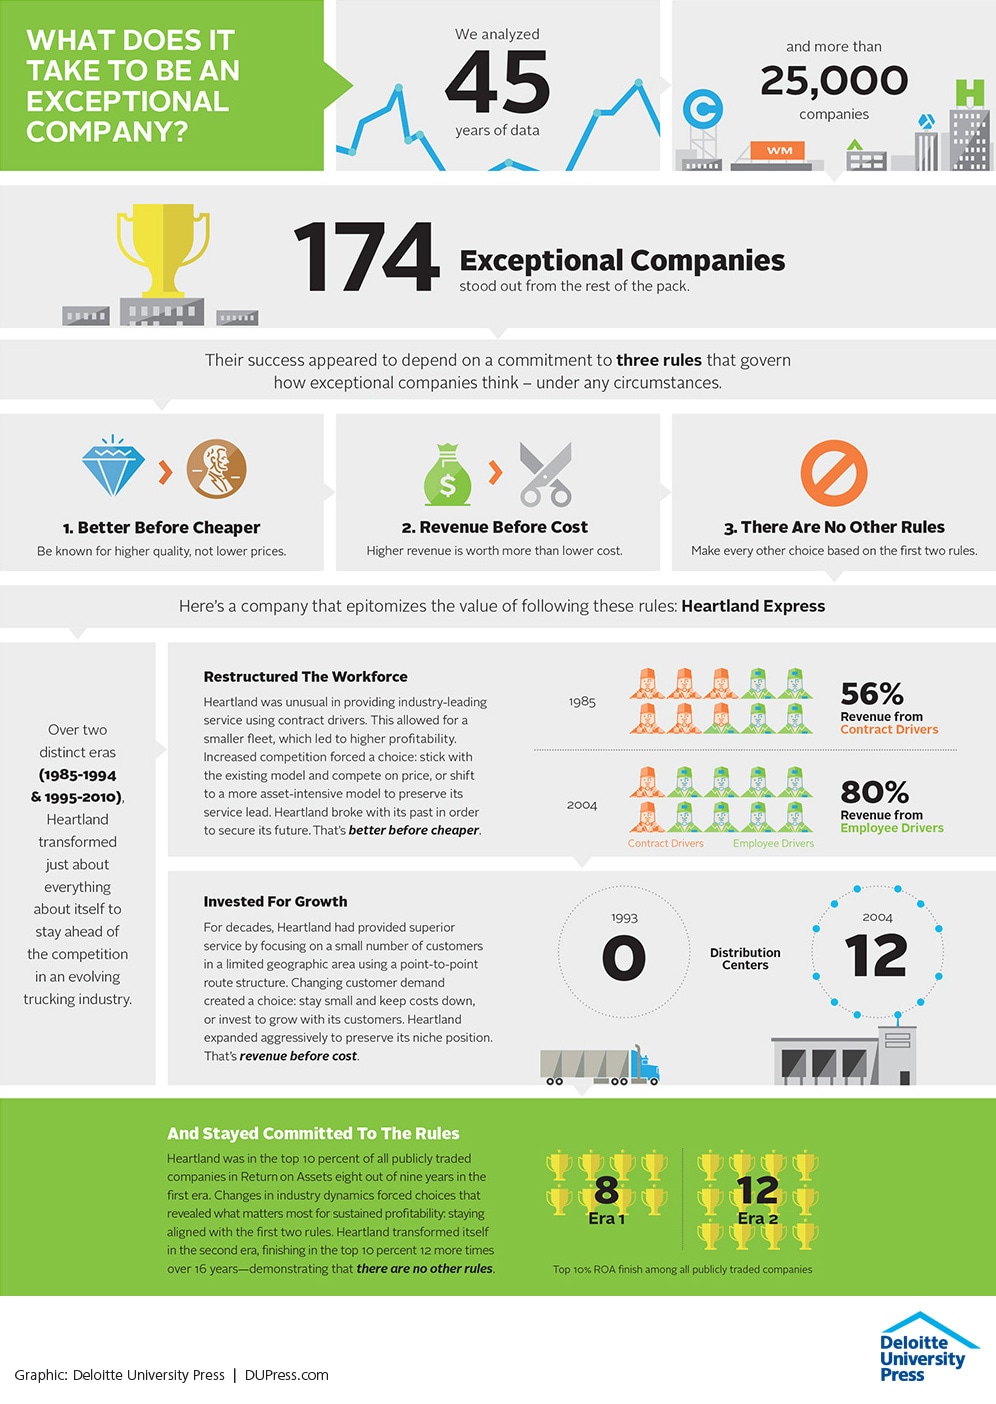 What does it take to be an exceptional company?